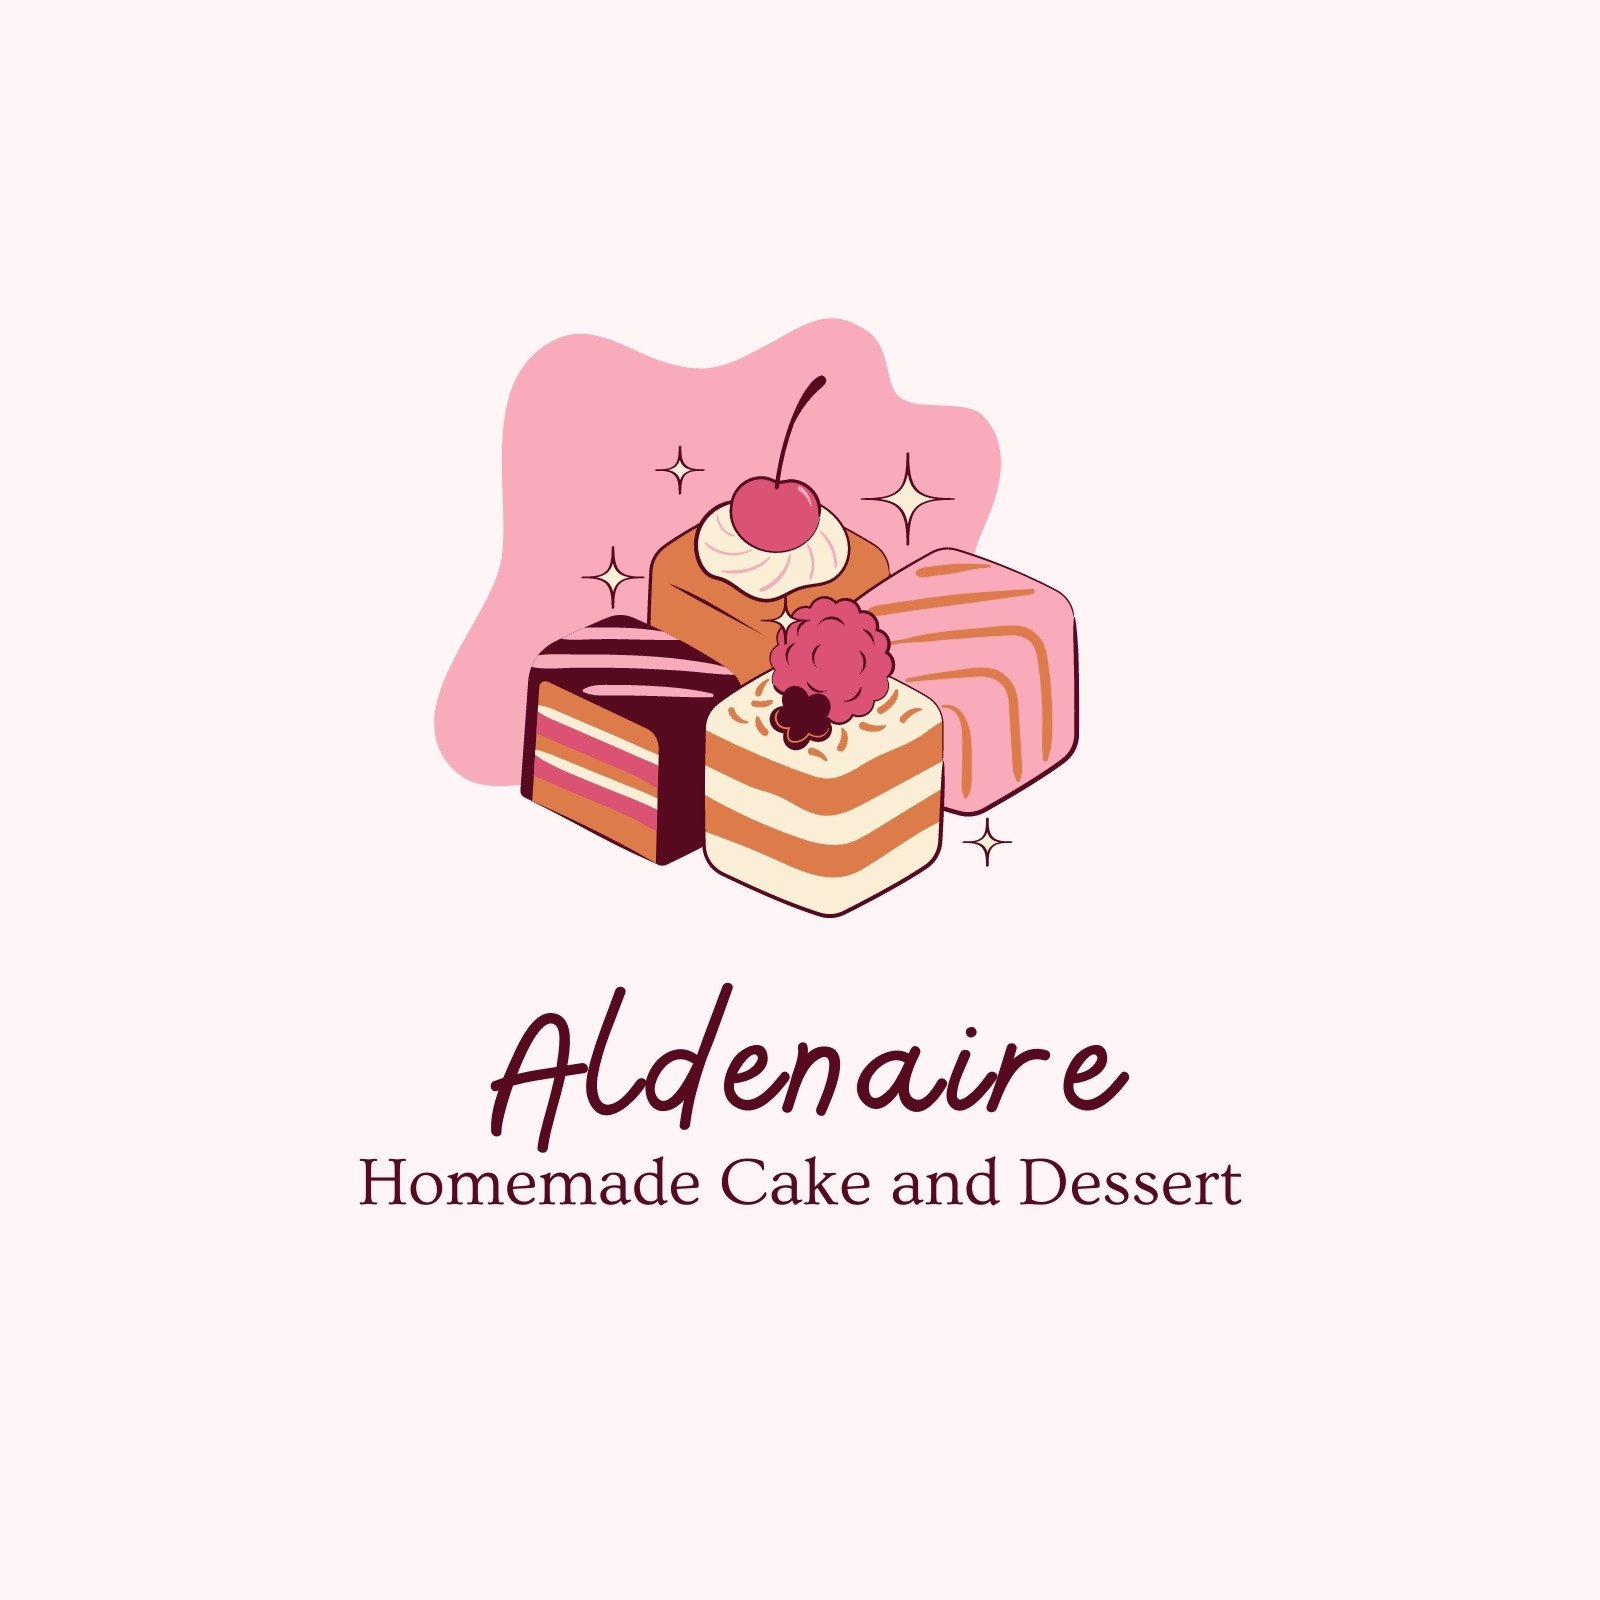 Top more than 142 cakes and events